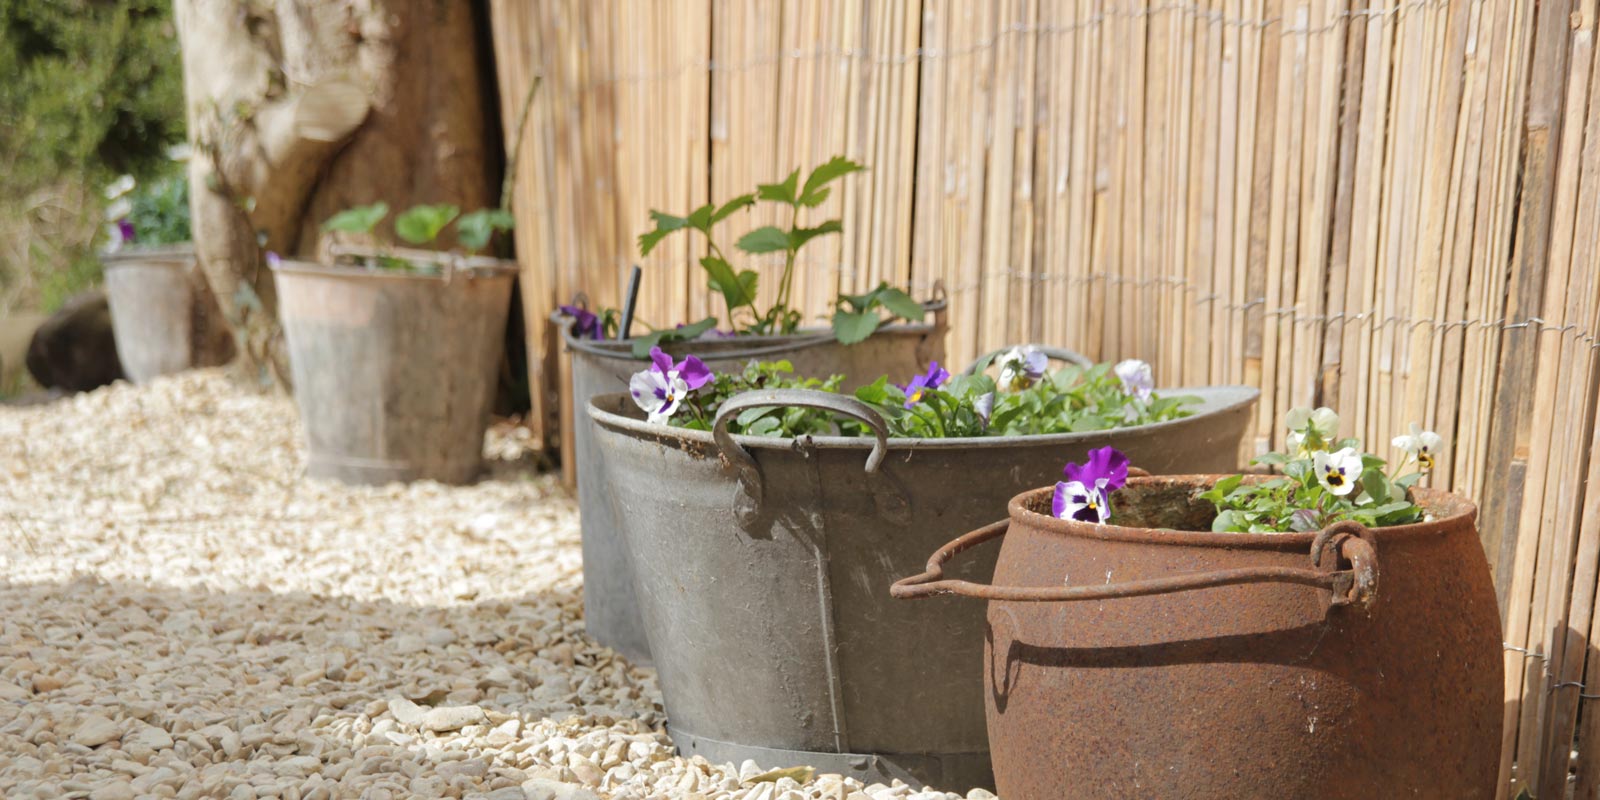 Reclaimed pots used for flowers in the garden